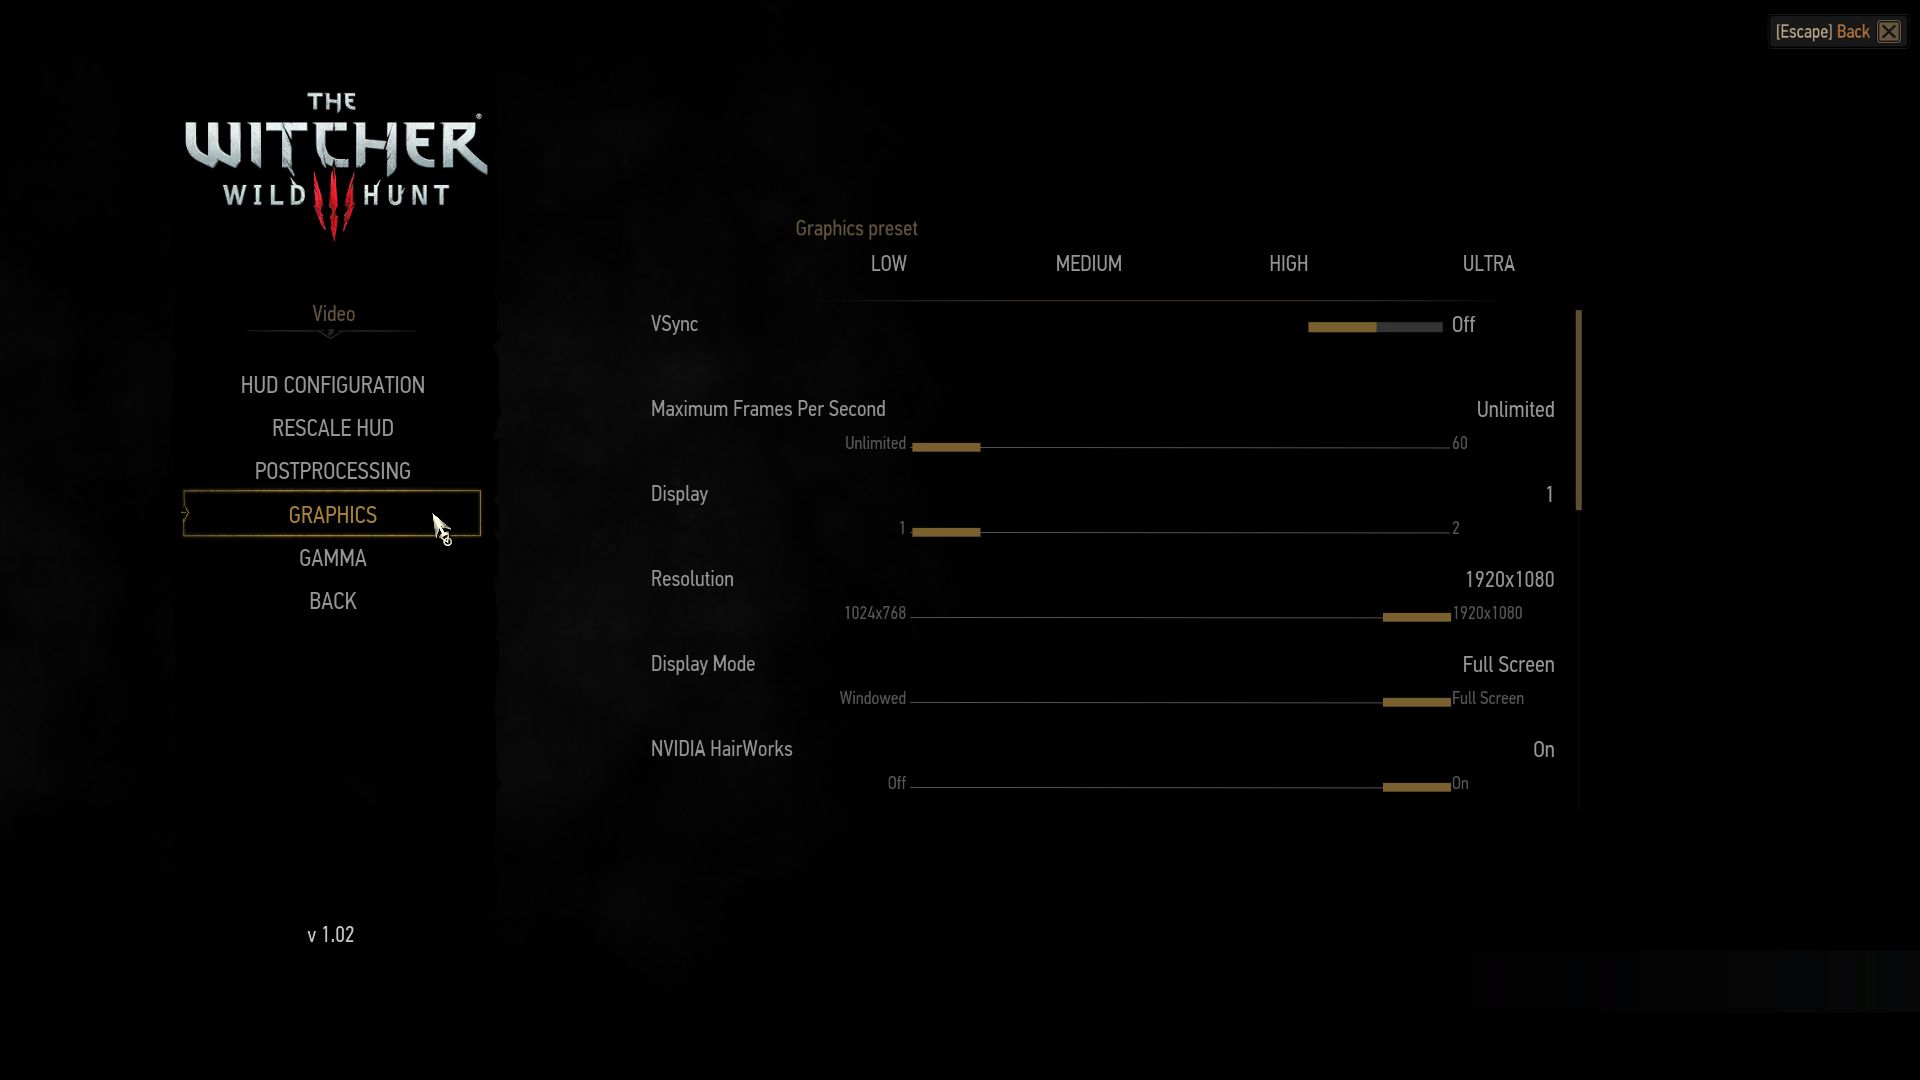 The Witcher 3 Notebook Benchmarks 